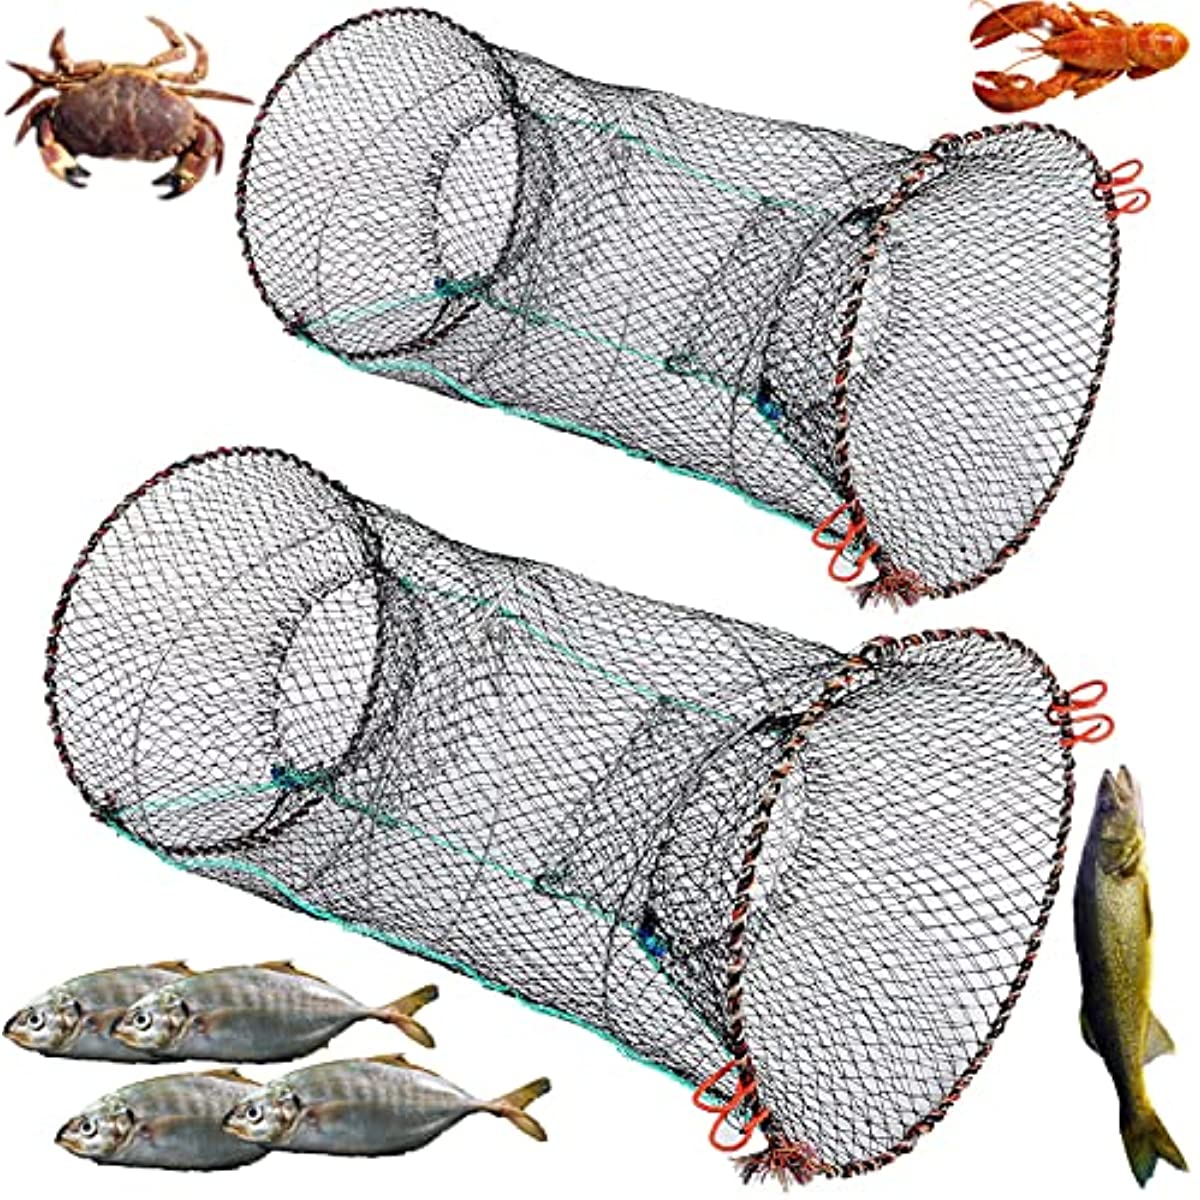 2 packs Collapsible Fishing Bait Trap for Crab, Minnow, Crawfish, Lobster,  and Shrimp - Portable Cast Net with Foldable Design and Accessories Include